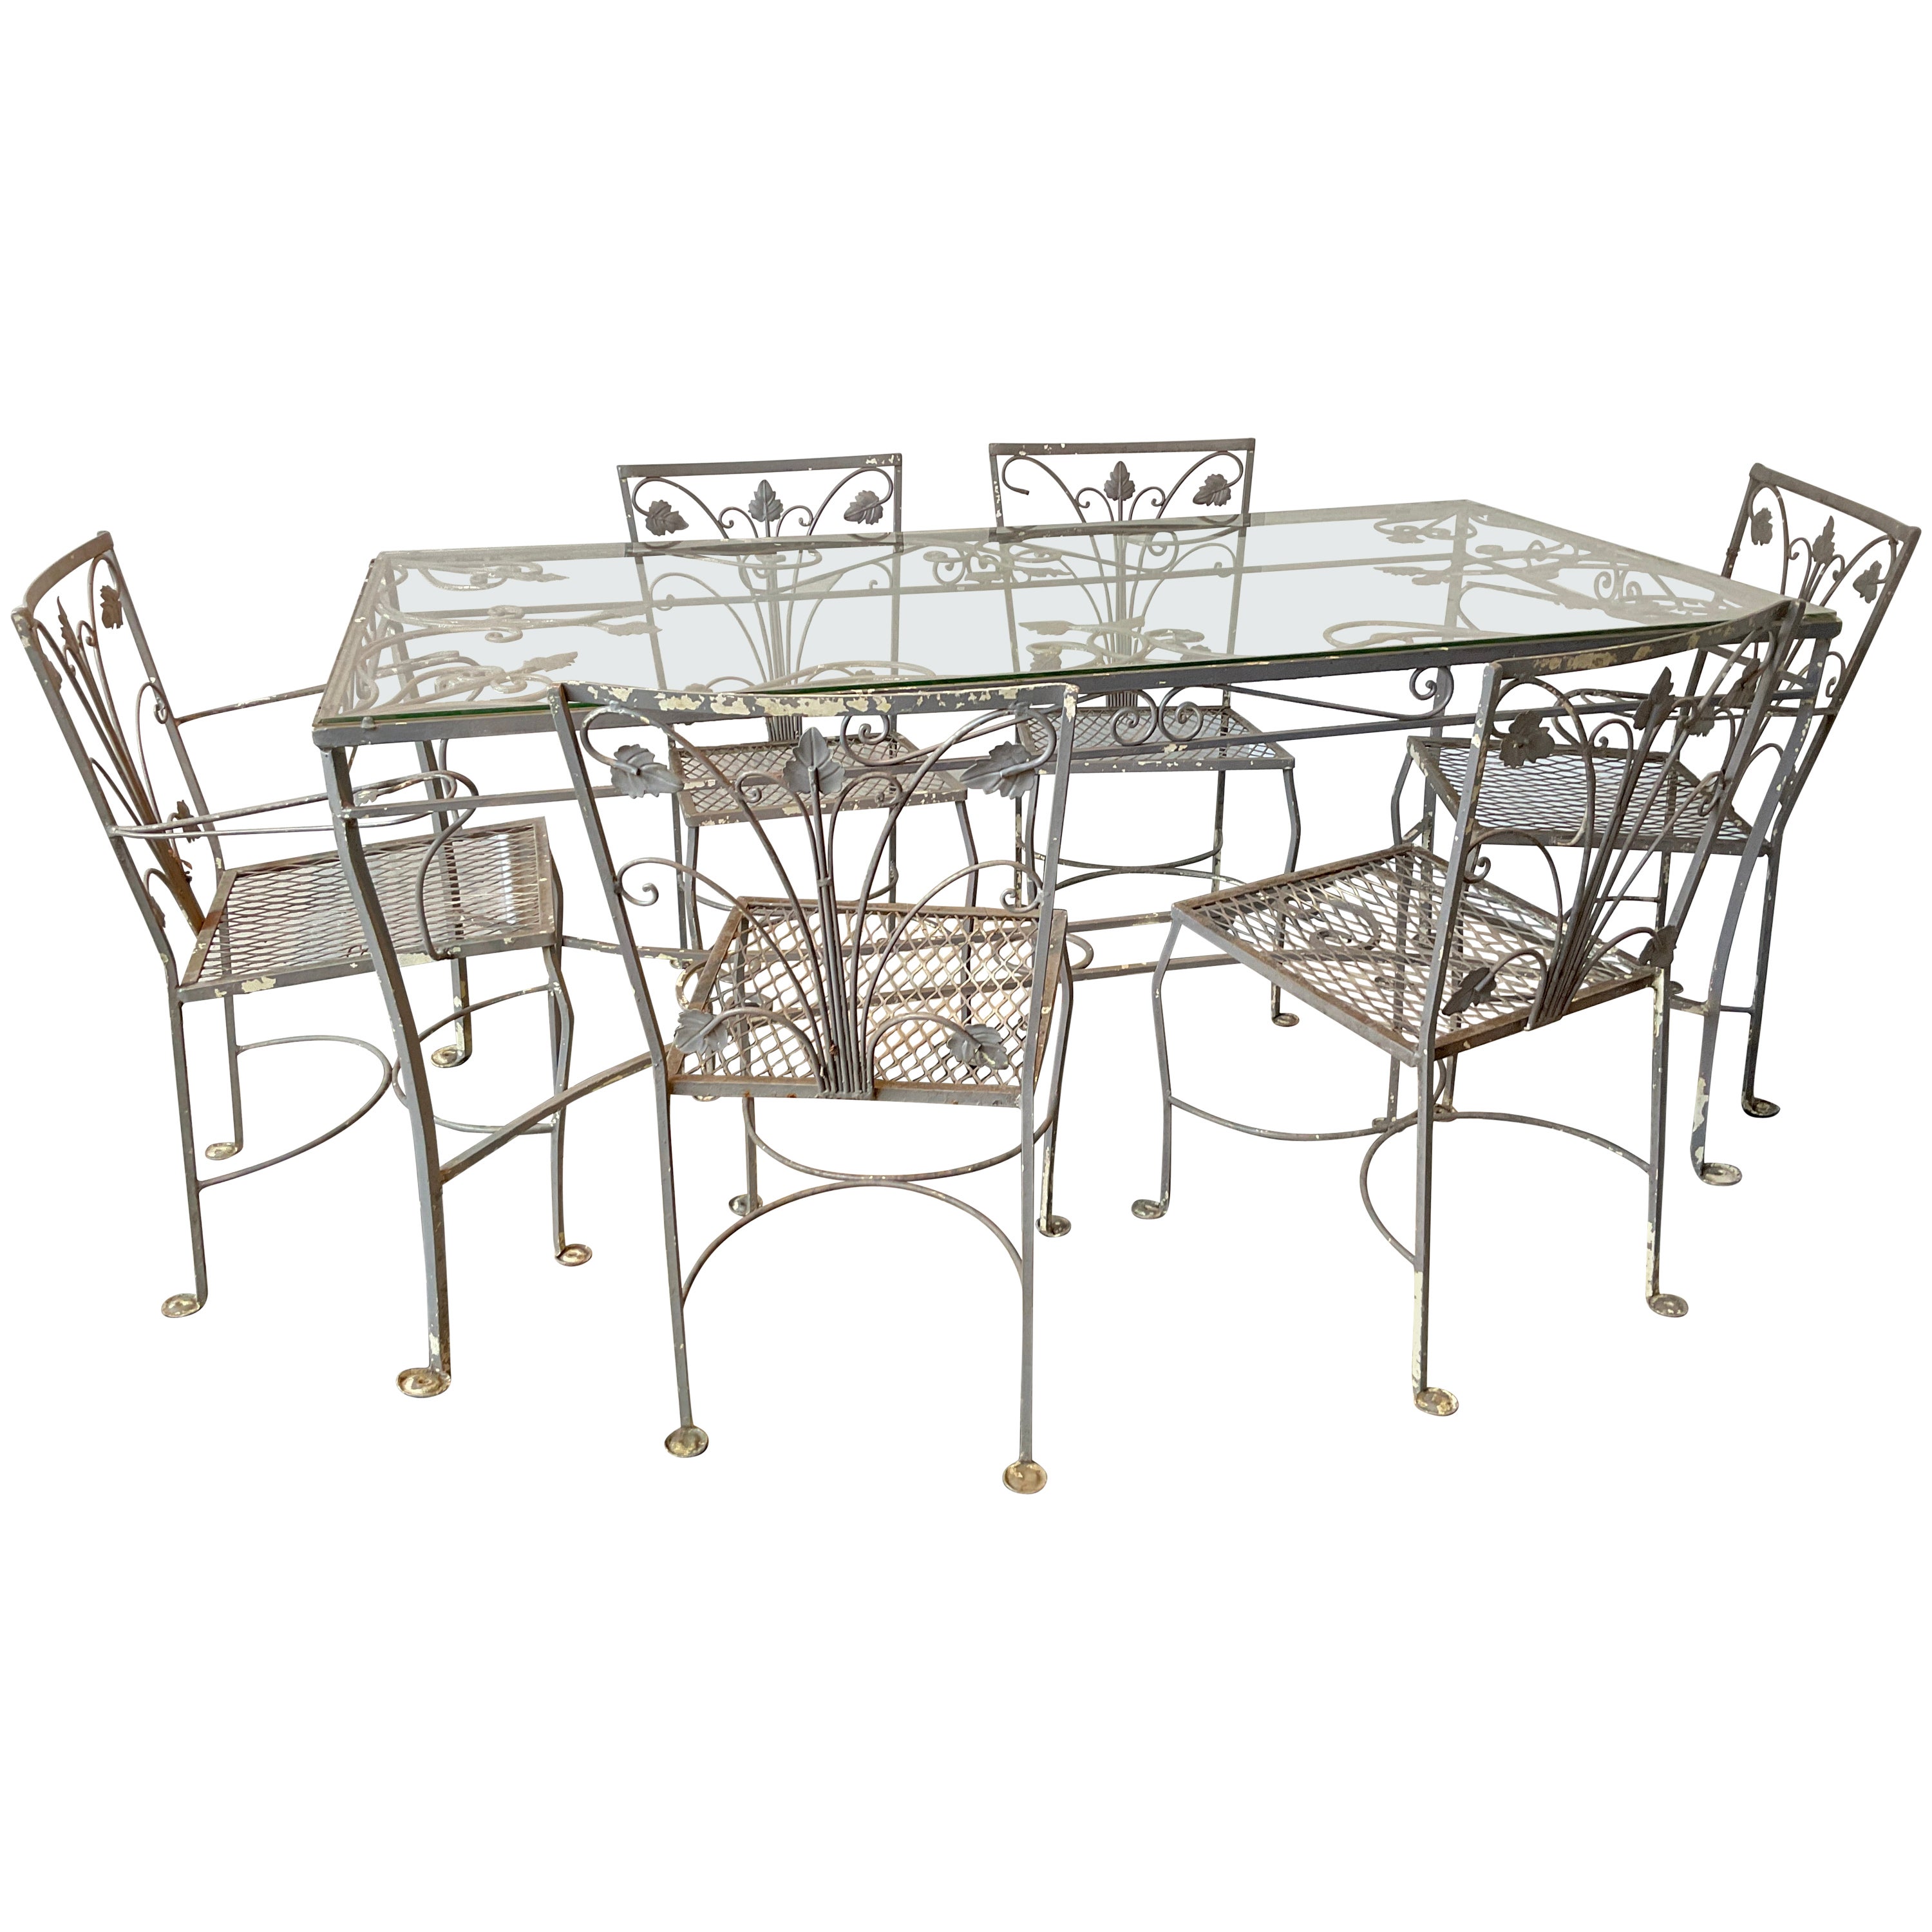 1960s Wrought Iron Salterini Outdoor Dining Set for 6